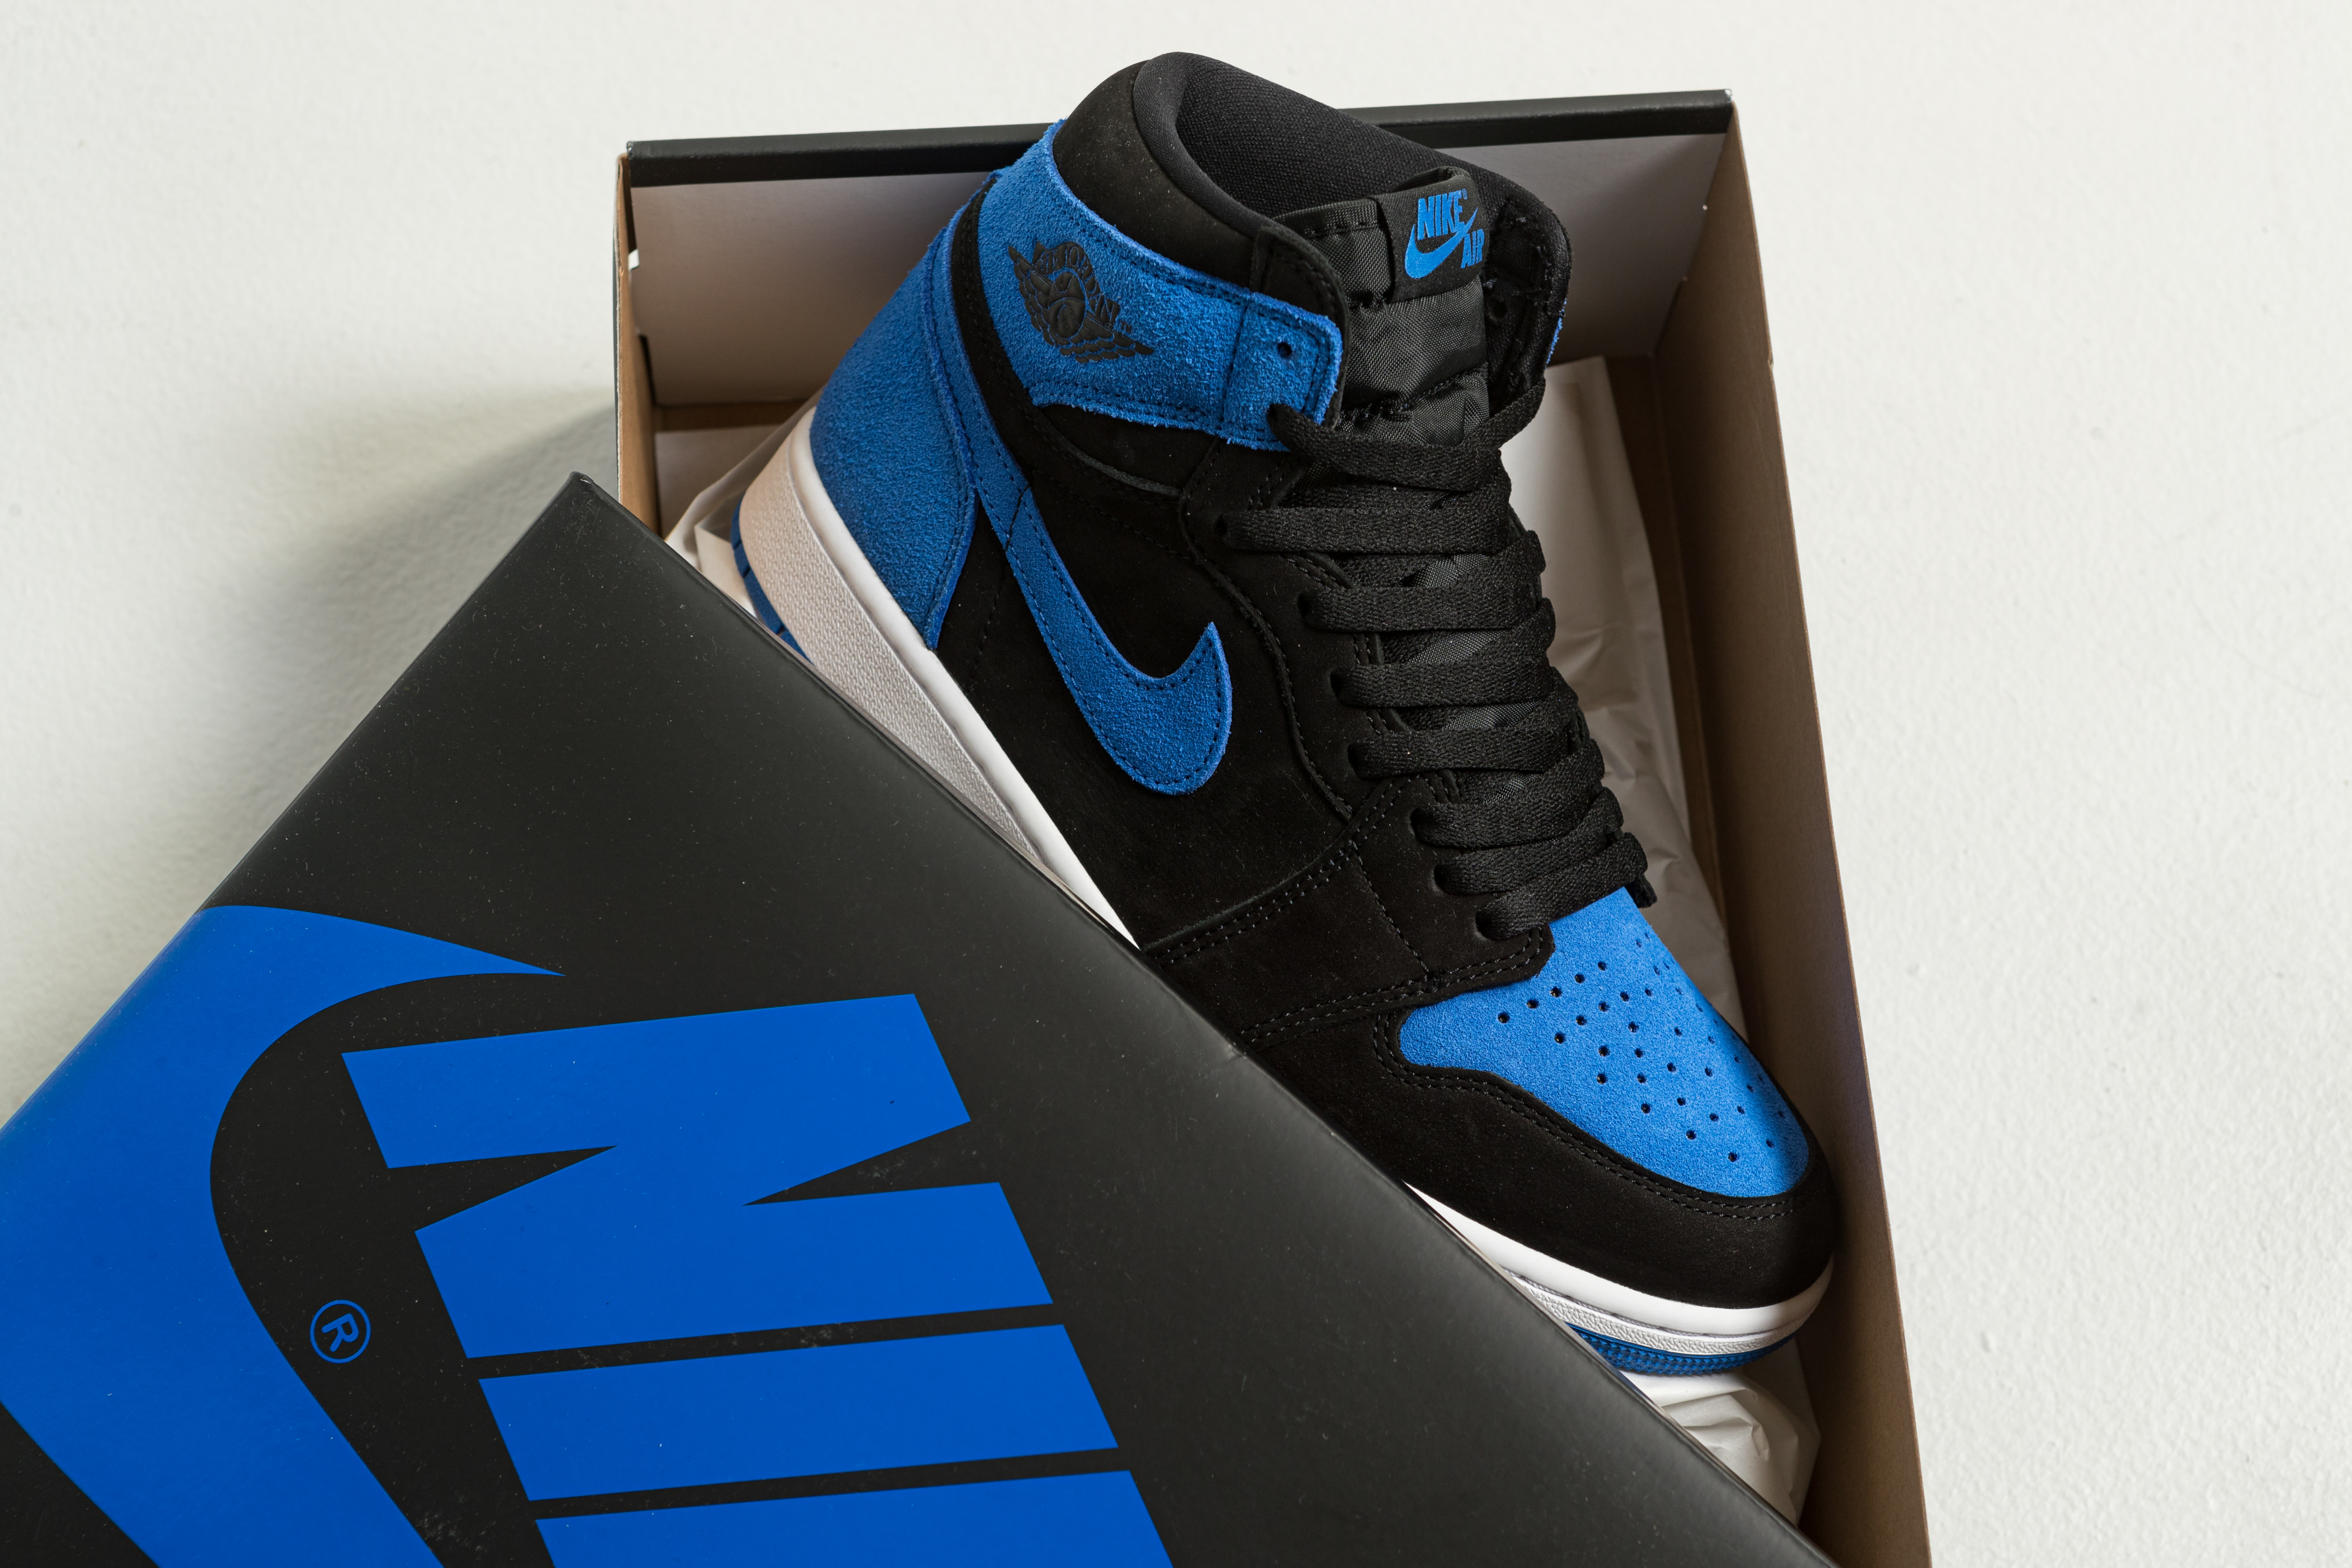 UP THERE Launches - Nike Air Jordan 1 Retro High OG 'Reimagined' - Black/Royal Blue-White